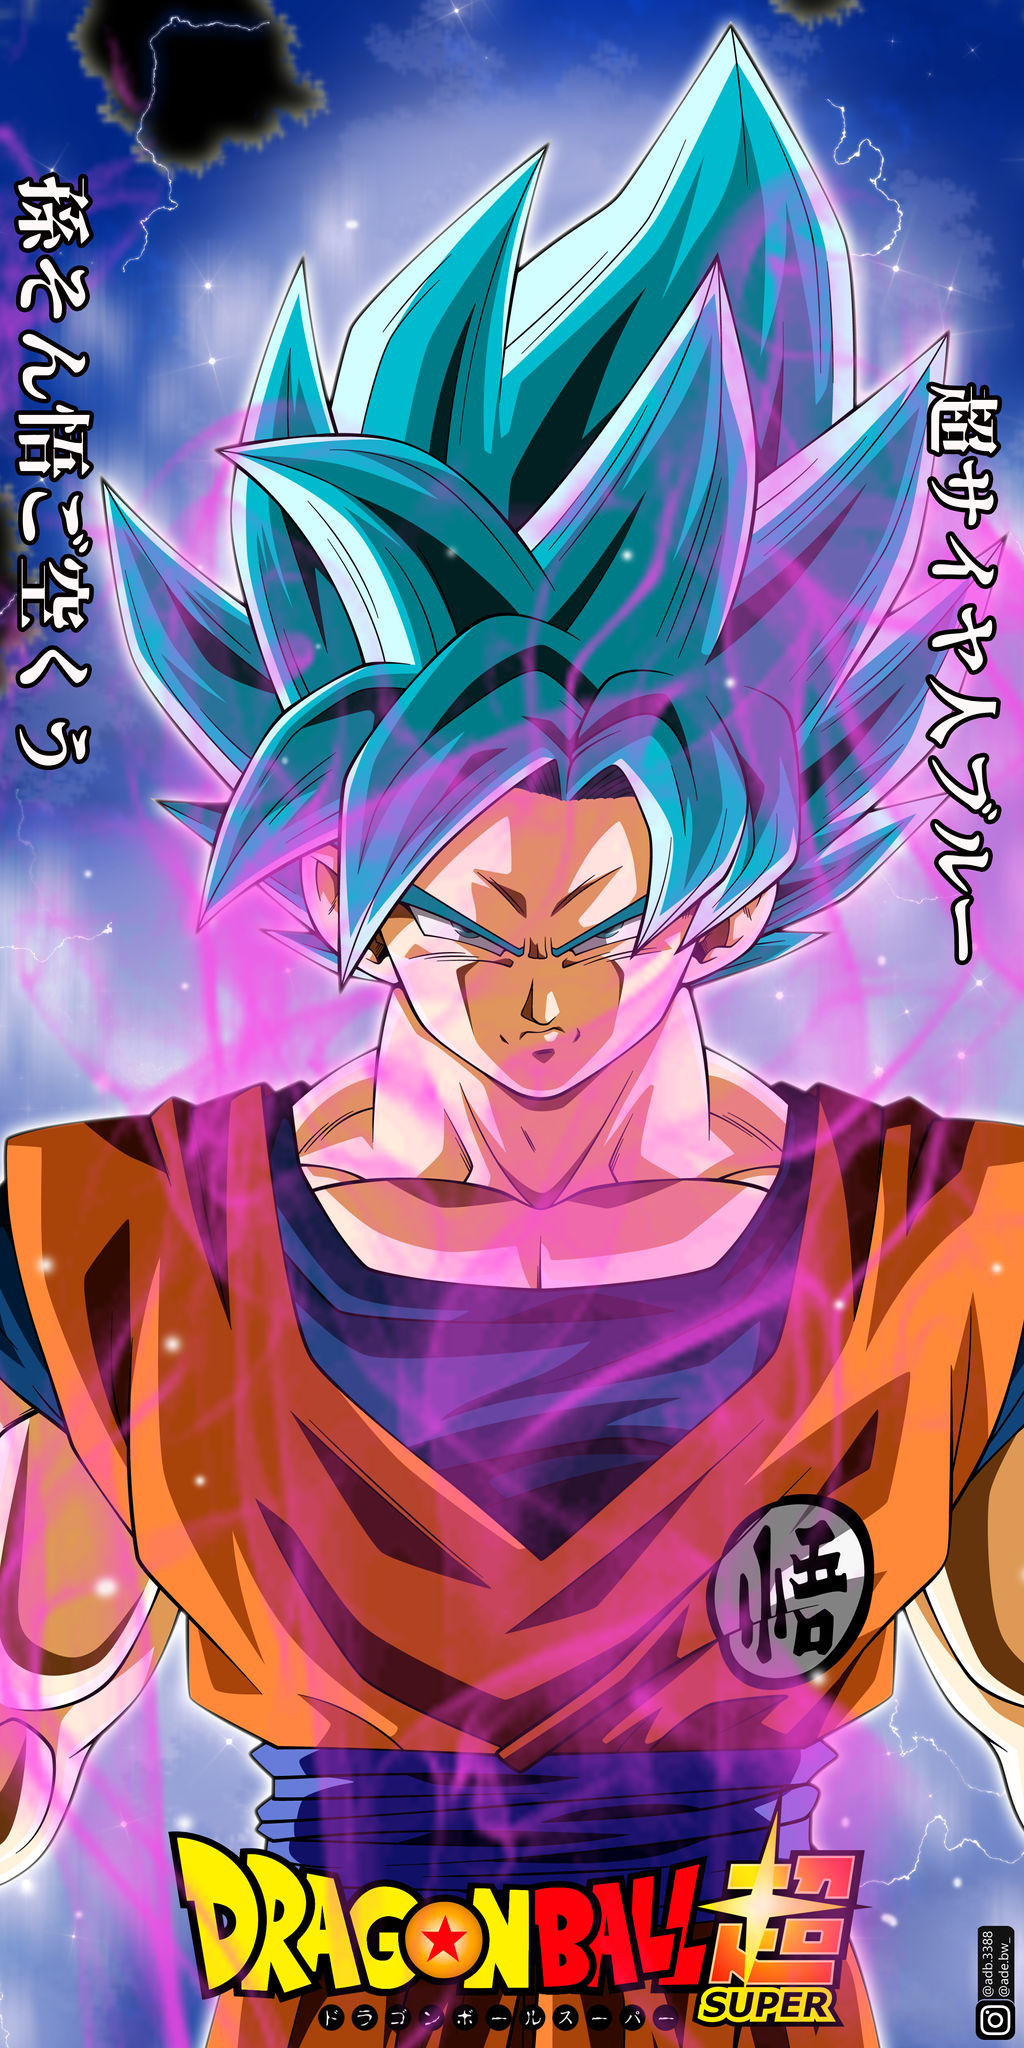 Uub, are you going to replace Goku? by adb3388 on DeviantArt